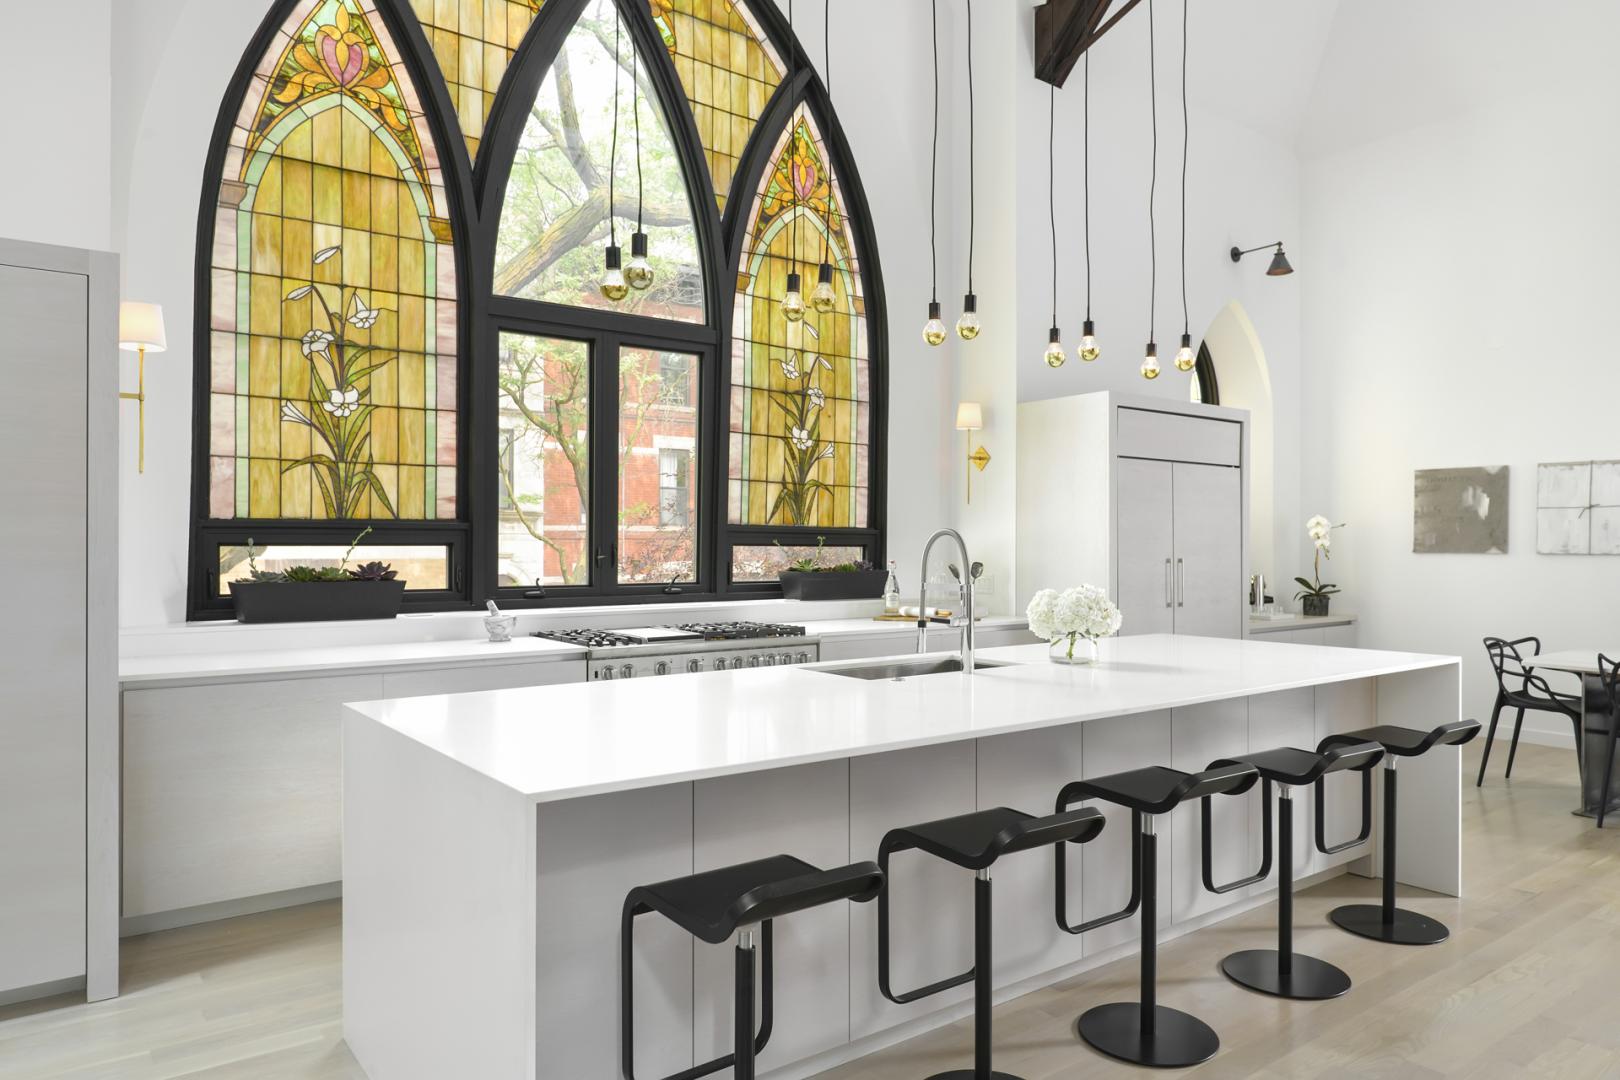 Kitchen with stained glass window